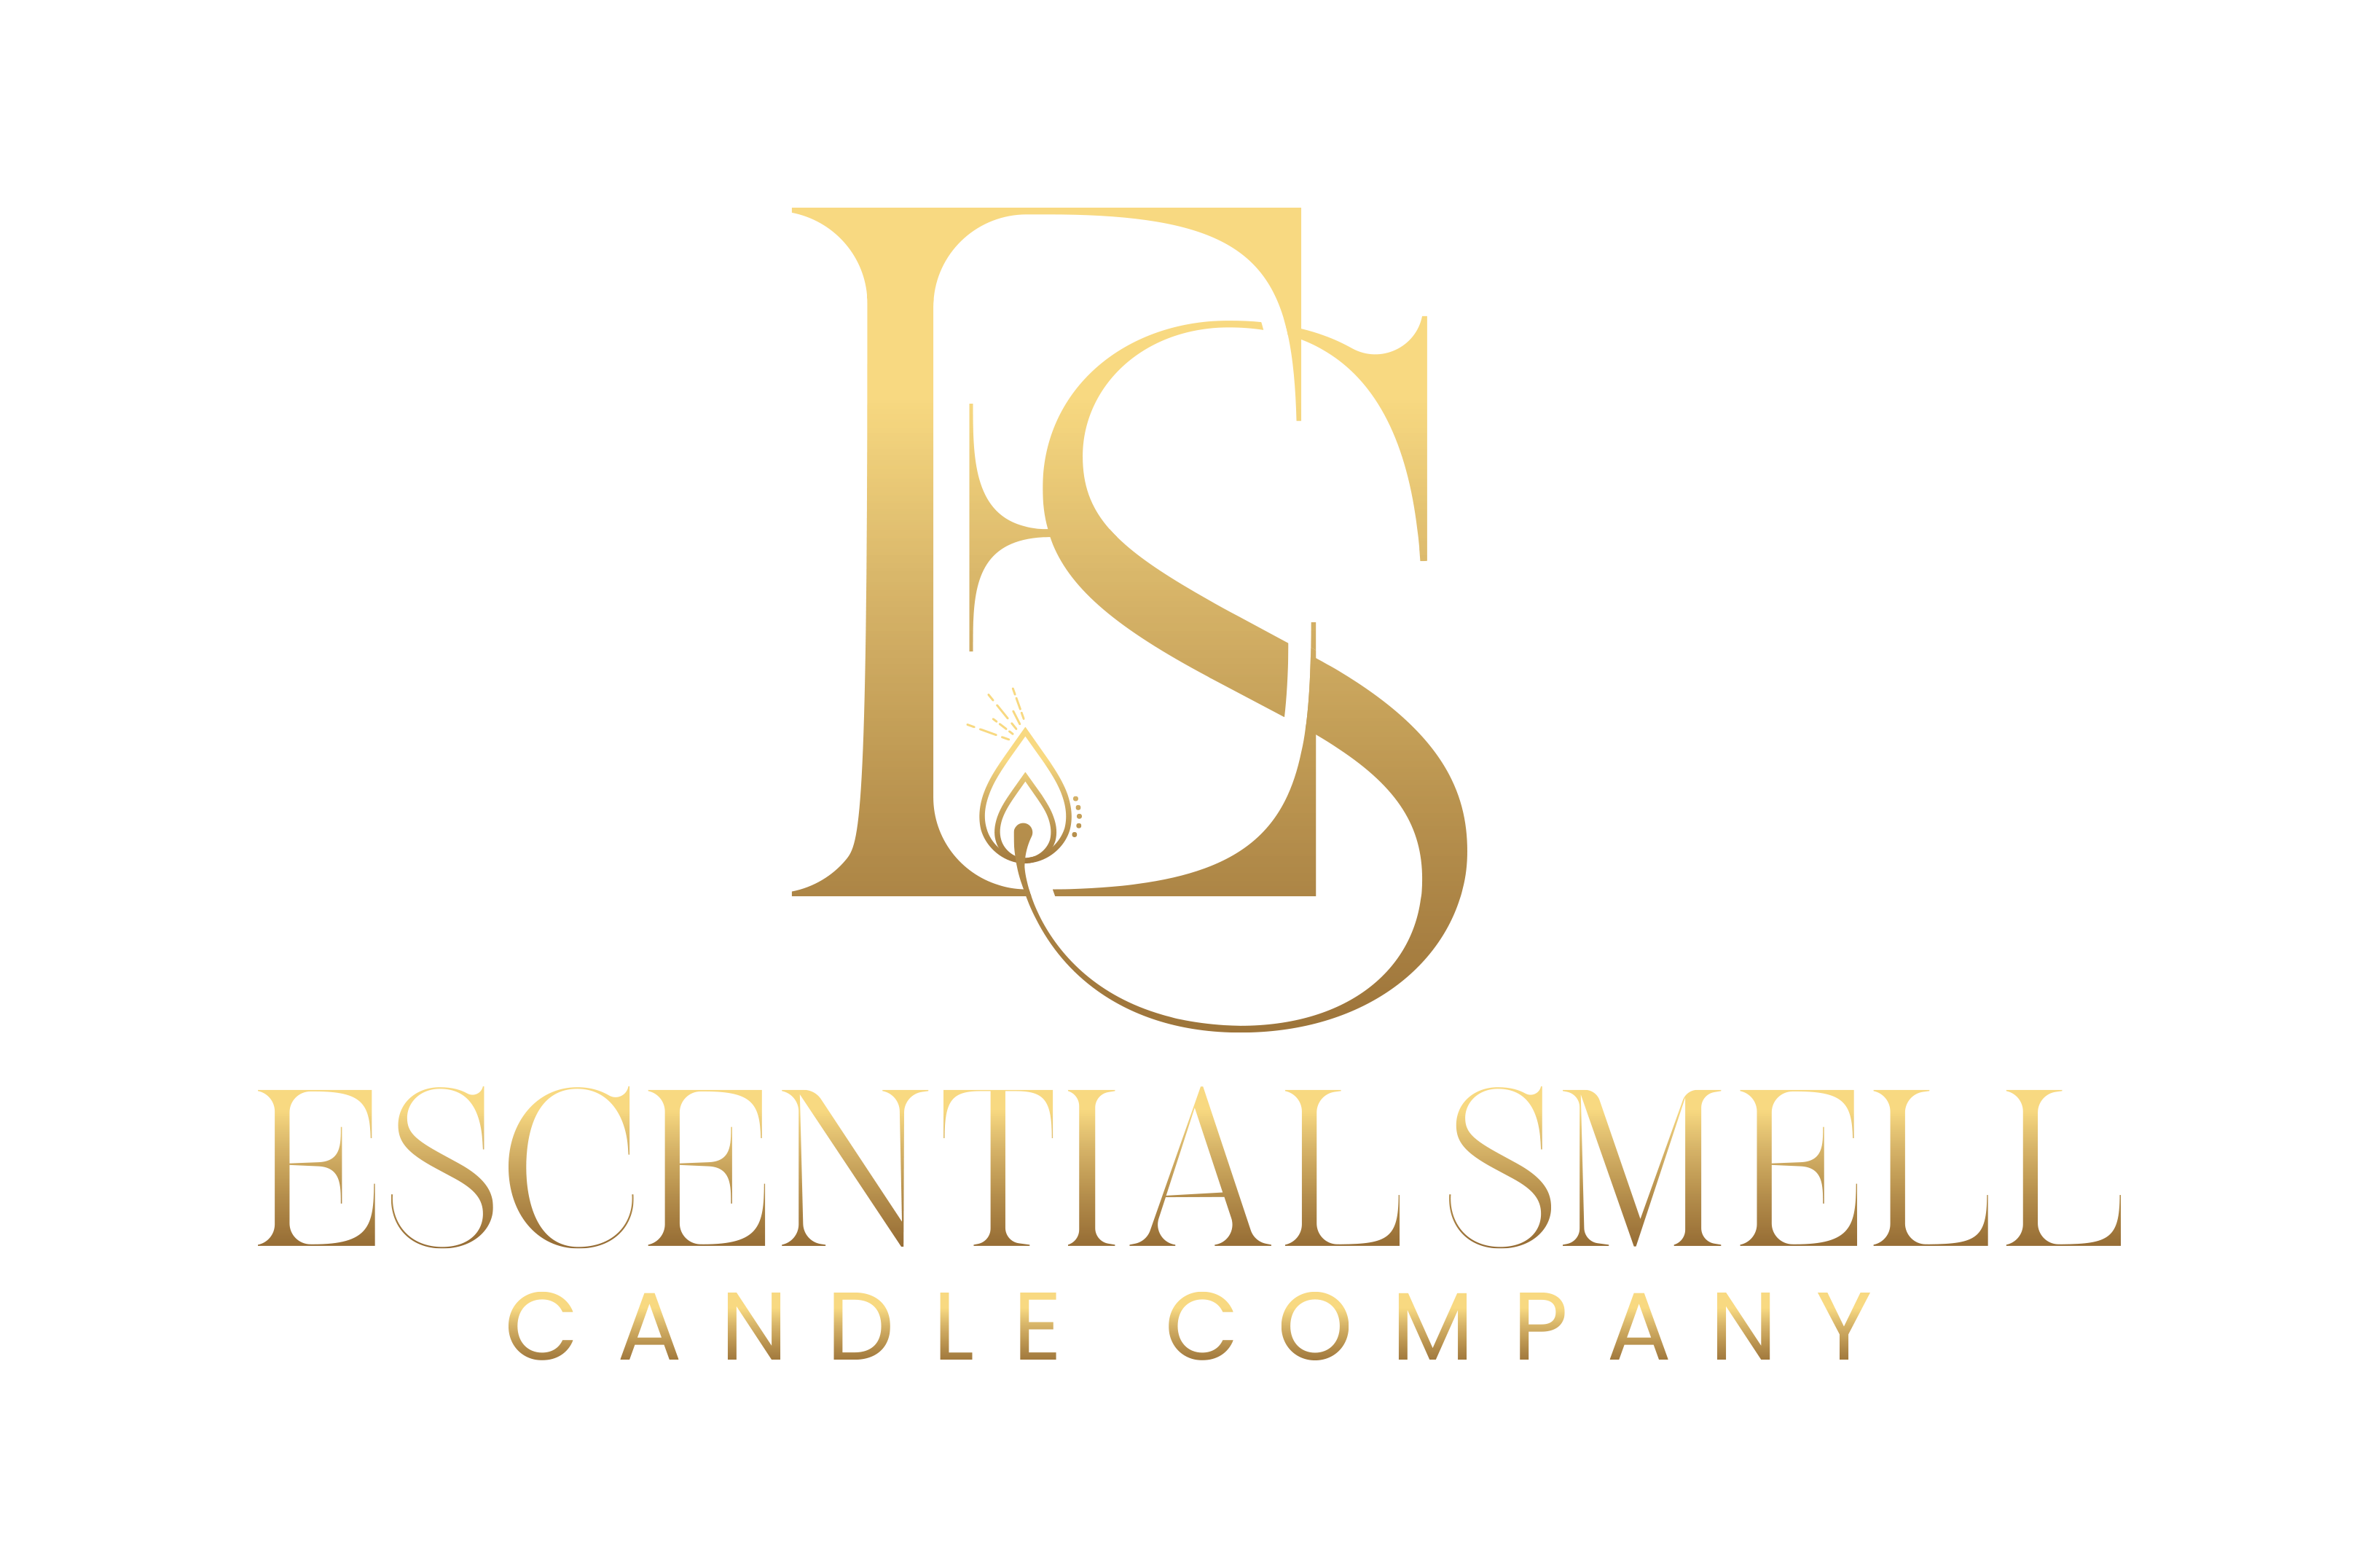 Escential Smell Candles